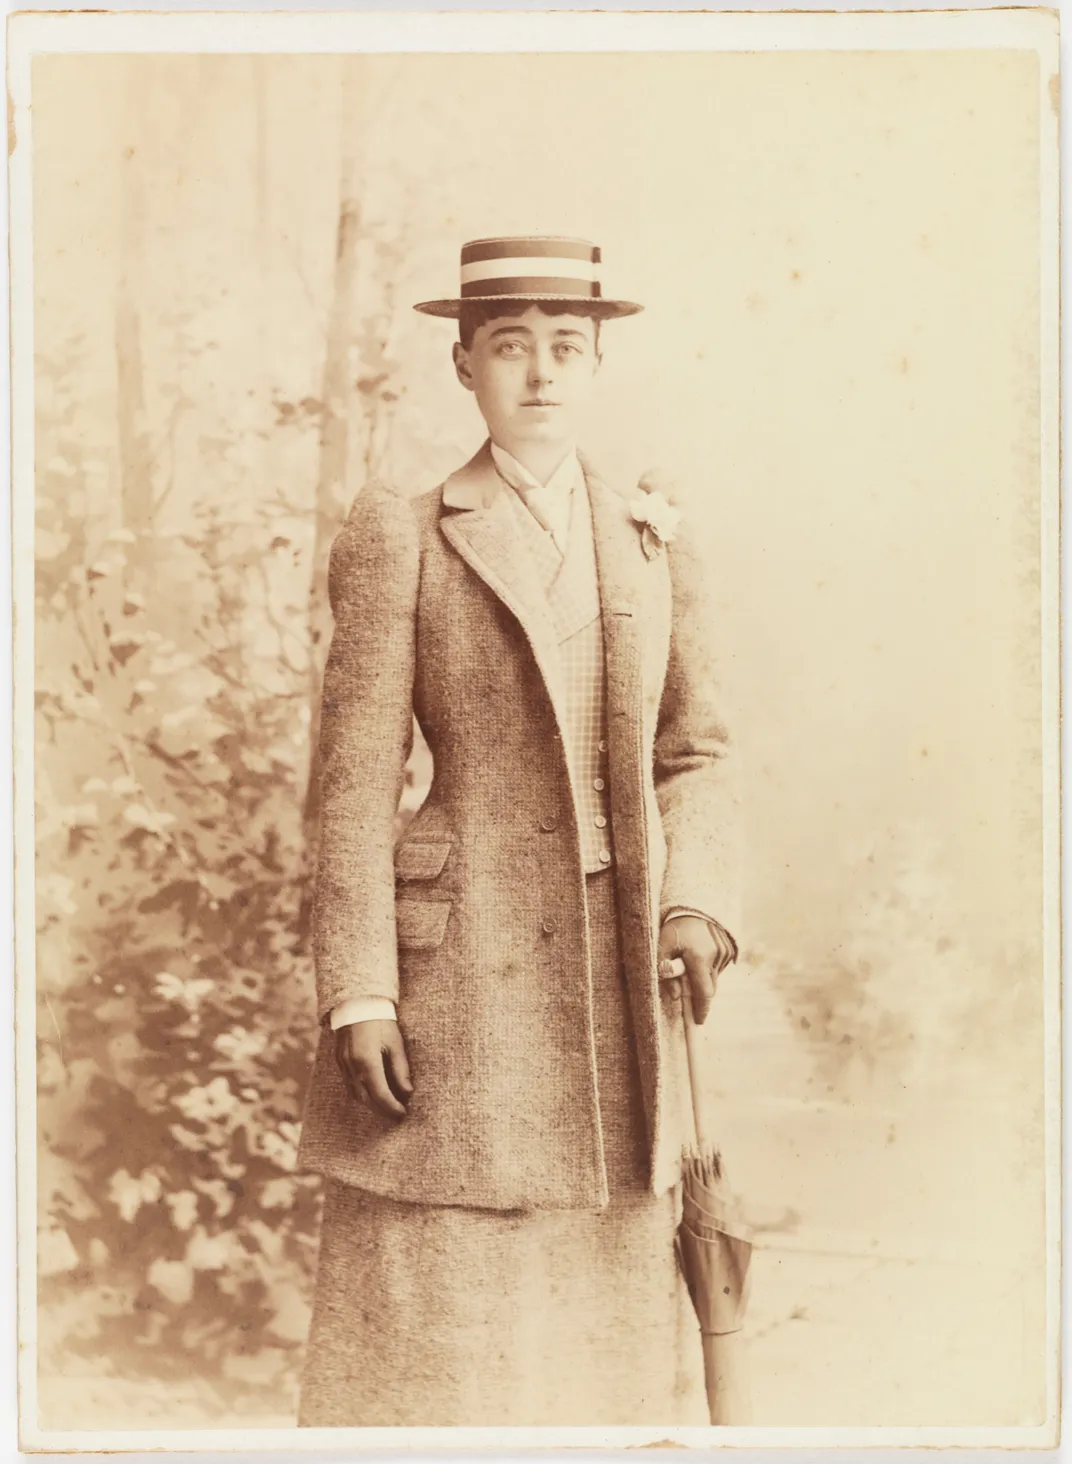 Sarah Cooper Hewitt, ca. 1890-92, collection of Edward Parmee